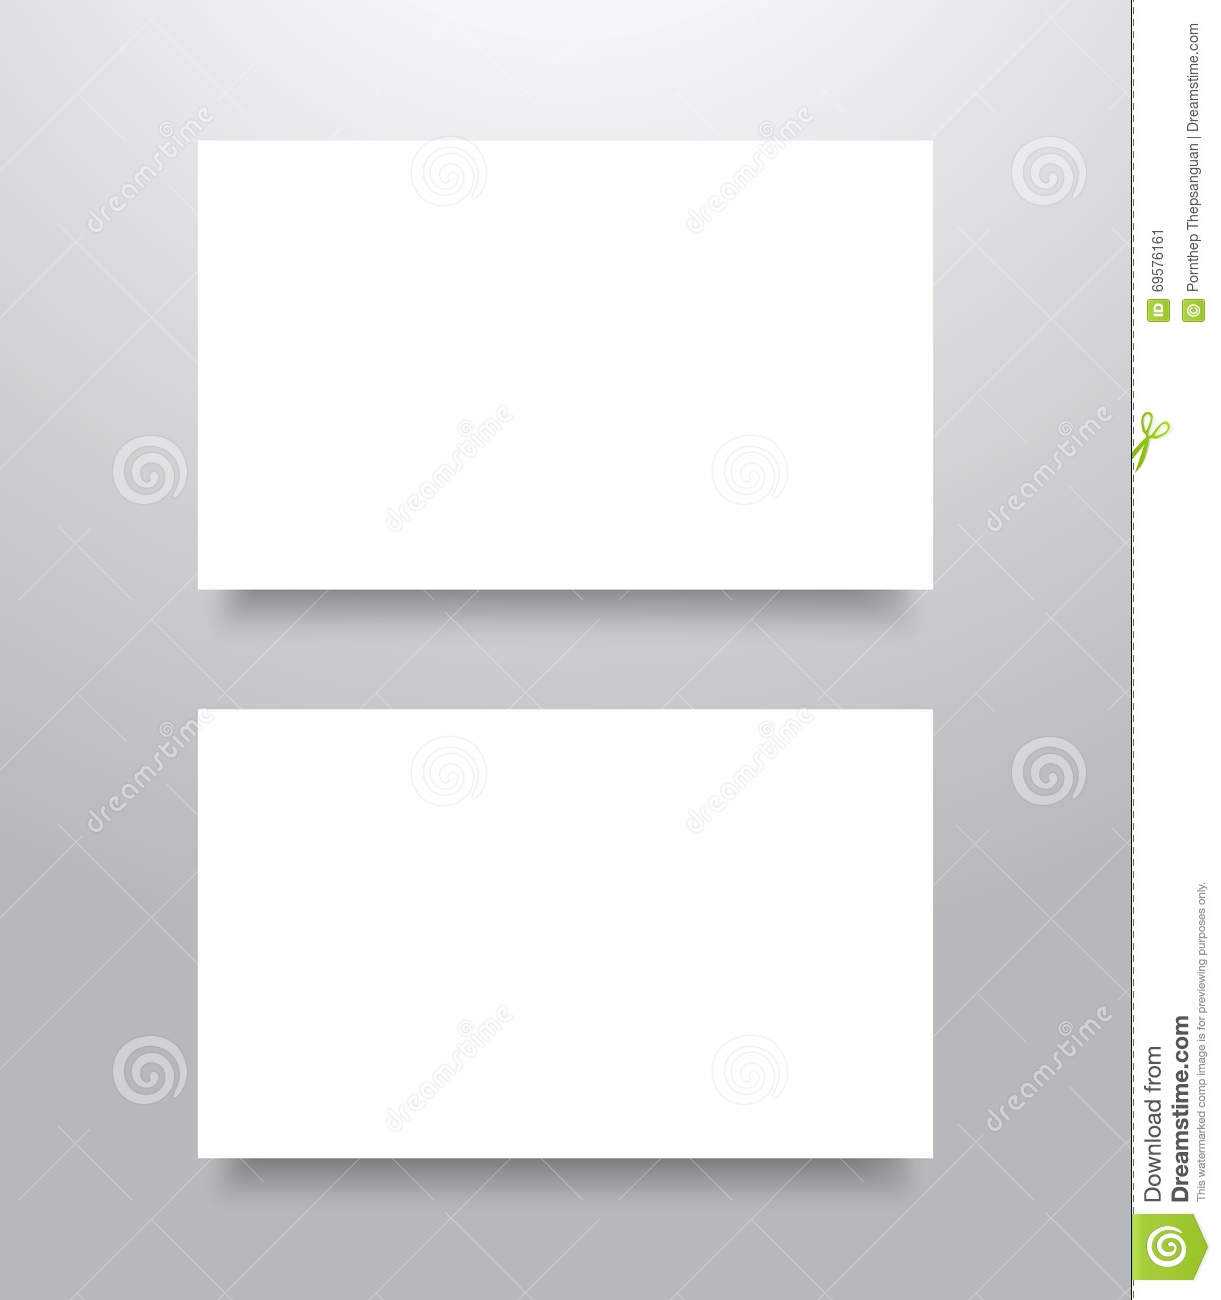 Blank Business Card Mockup Stock Vector. Illustration Of Intended For Blank Business Card Template Download